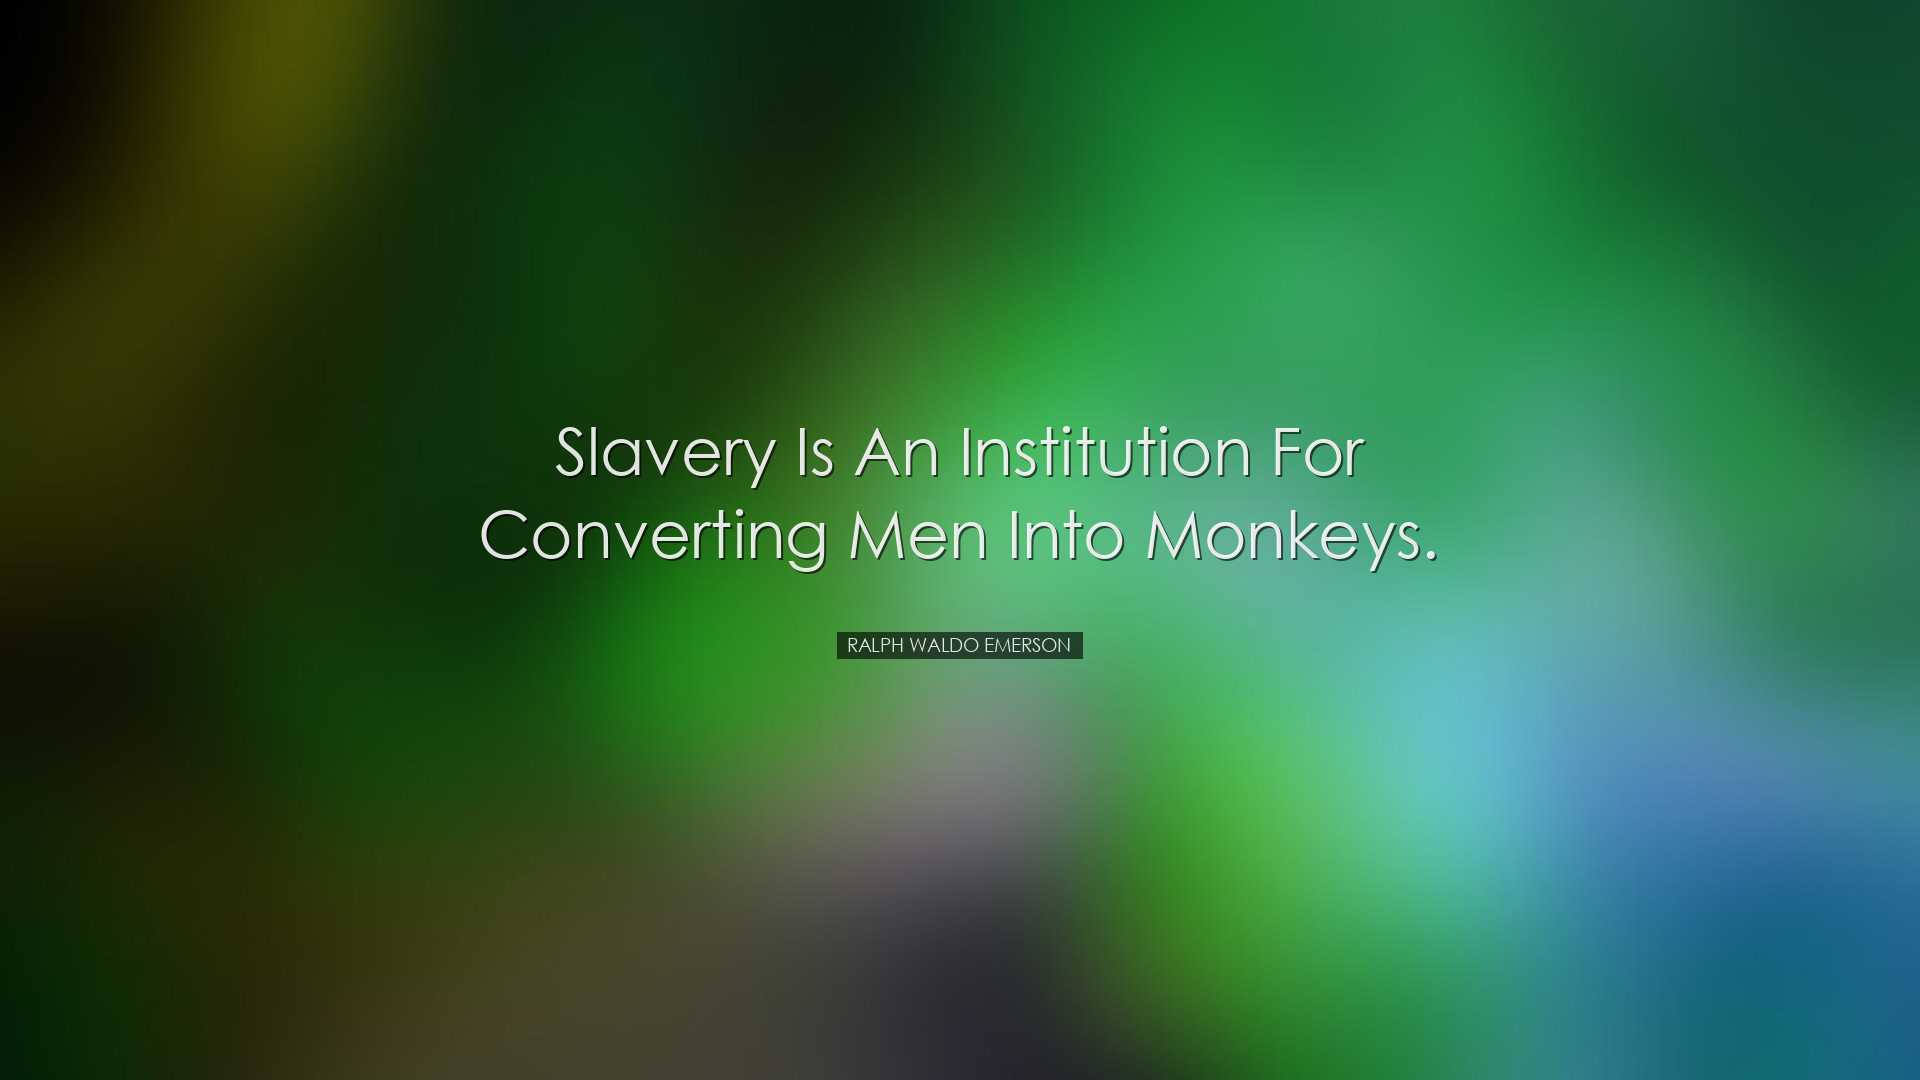 Slavery is an institution for converting men into monkeys. - Ralph